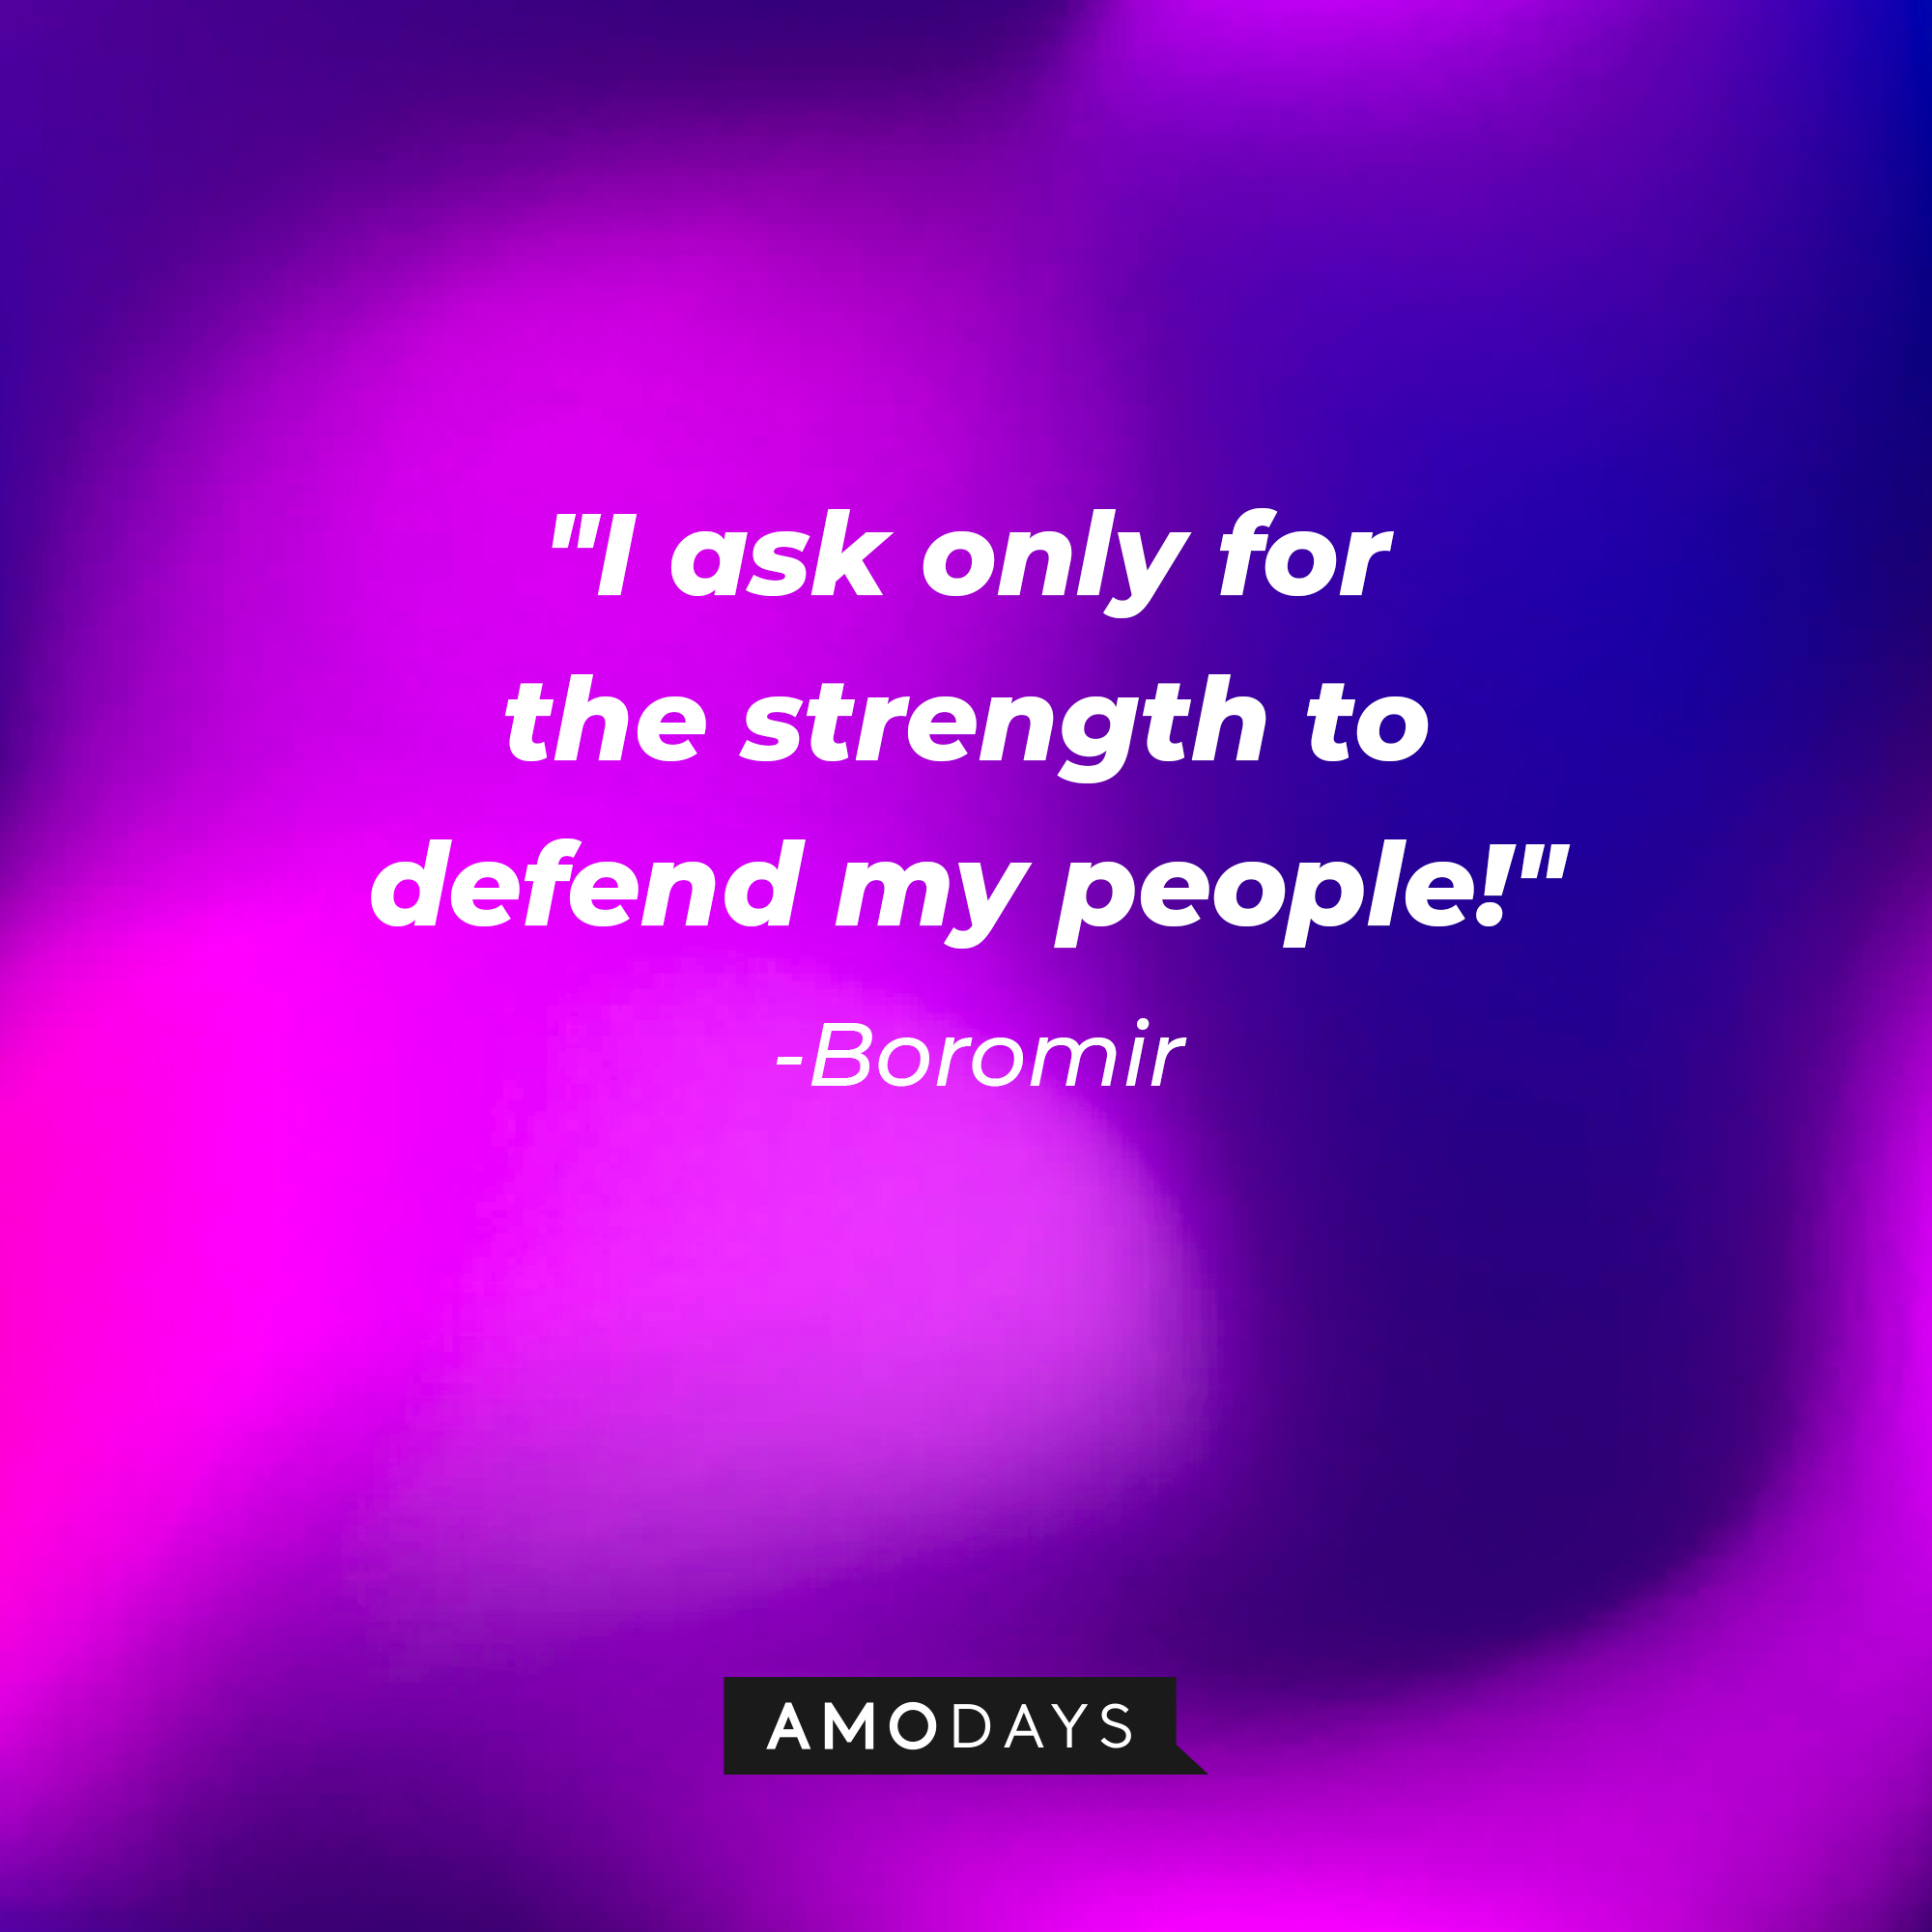 Boromir's quote: "I ask only for the strength to defend my people!" | Source: AmoDays